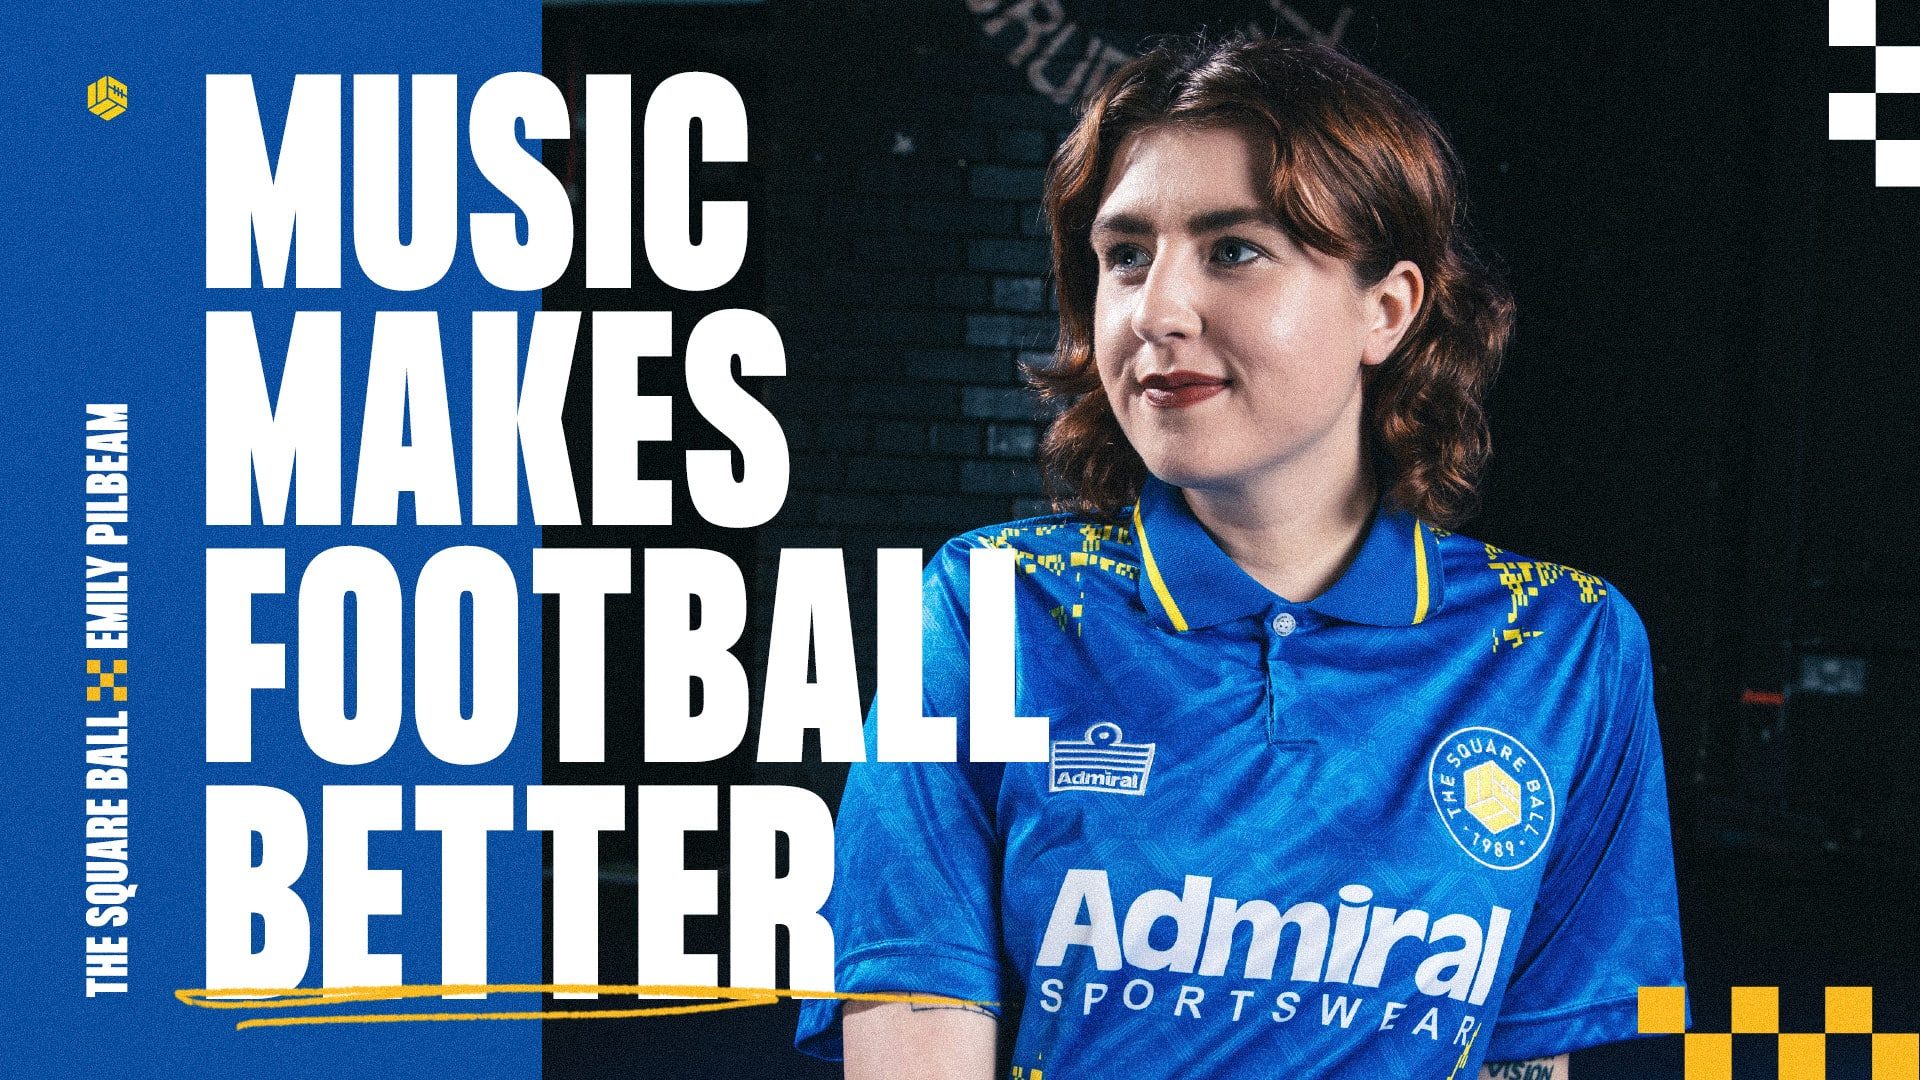 BBC Introducing DJ Emily Pilbeam wearing a TSB x Admiral blue away shirt, photographed at the Brudenell Social Club, next to the words 'Music Makes Football Better', because it does